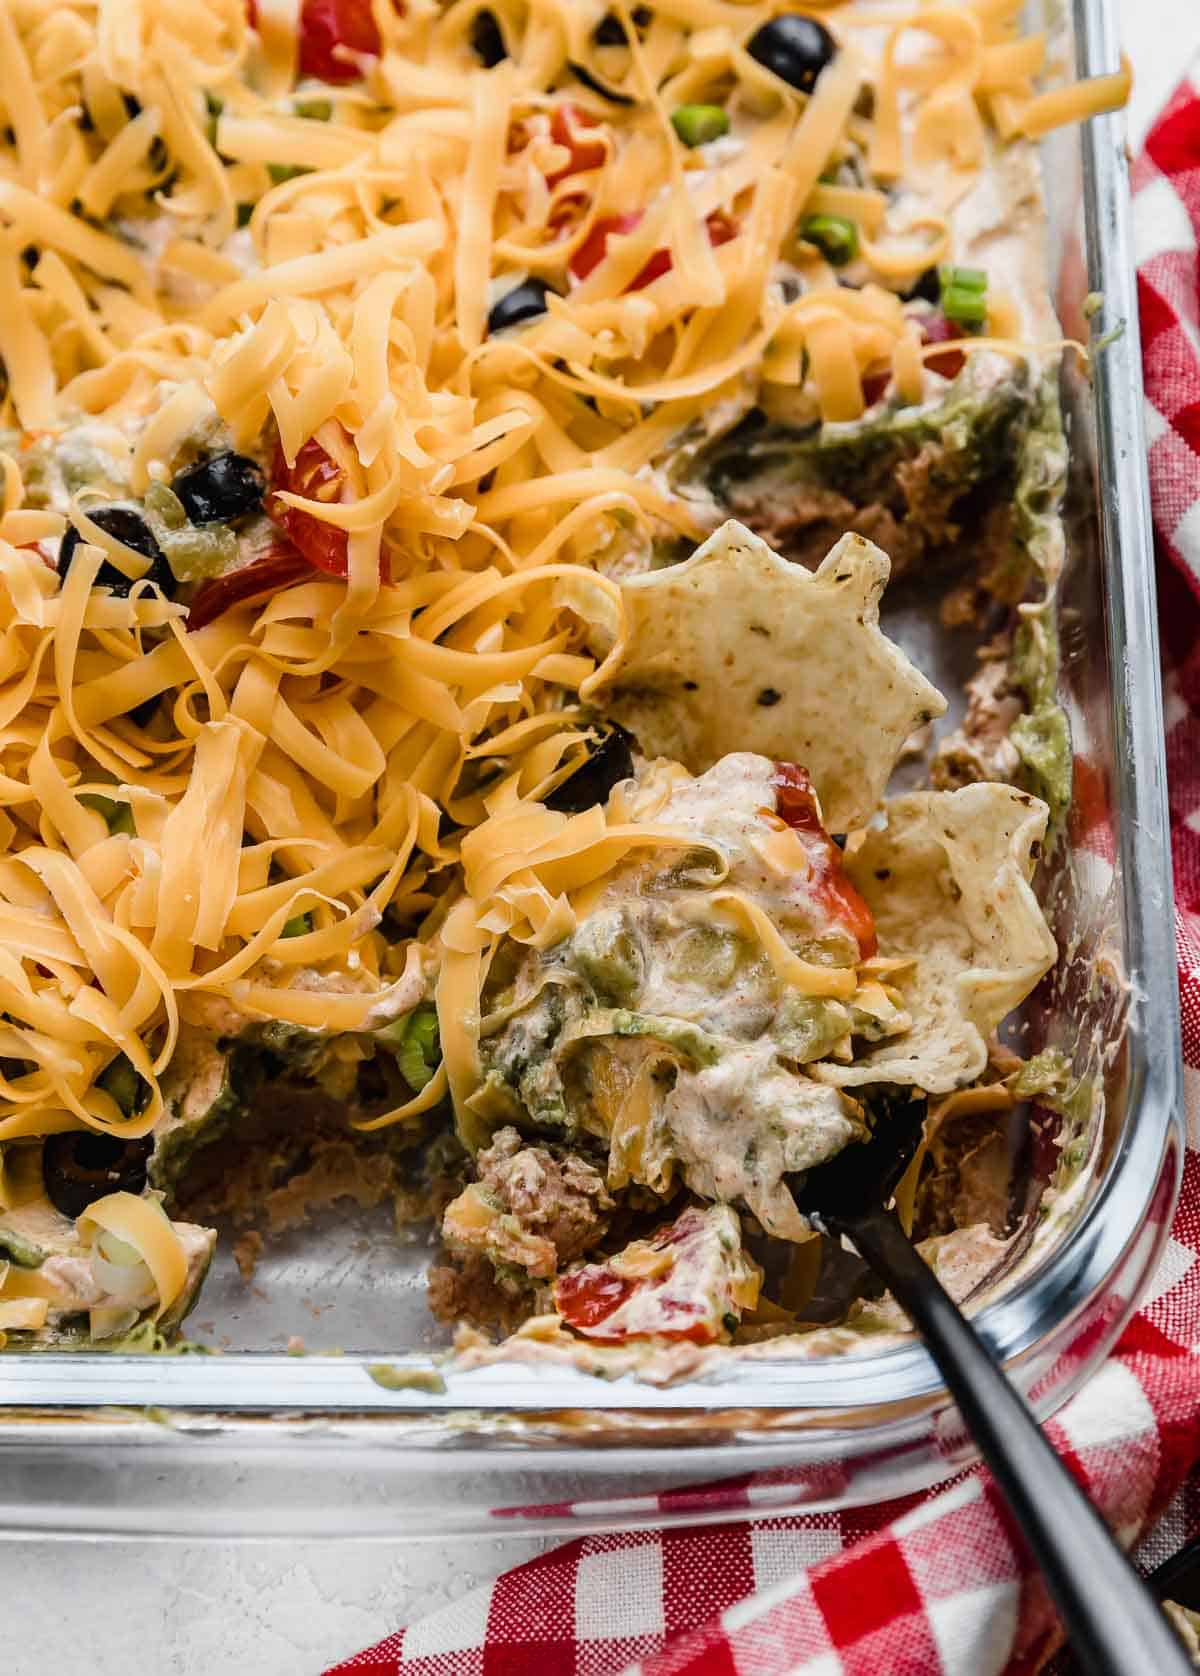 A tortilla chip dipping into a Layered Taco Dip with refried beans, guacamole, sour cream, and cheese.